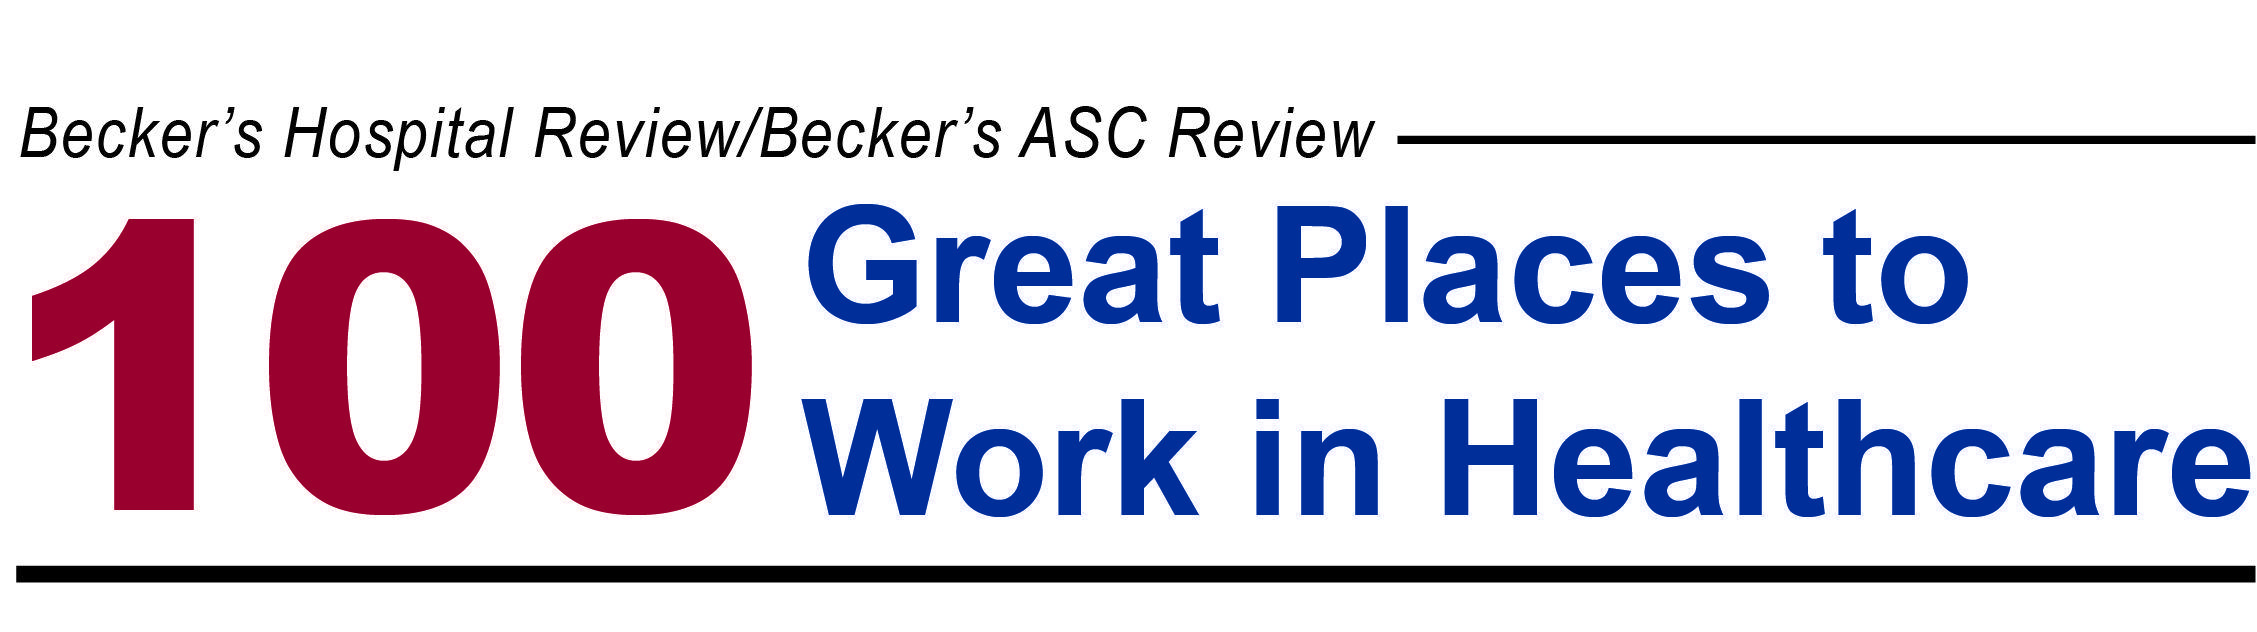 Becker's Hospital Review Logo - Great Places to Work in Healthcare